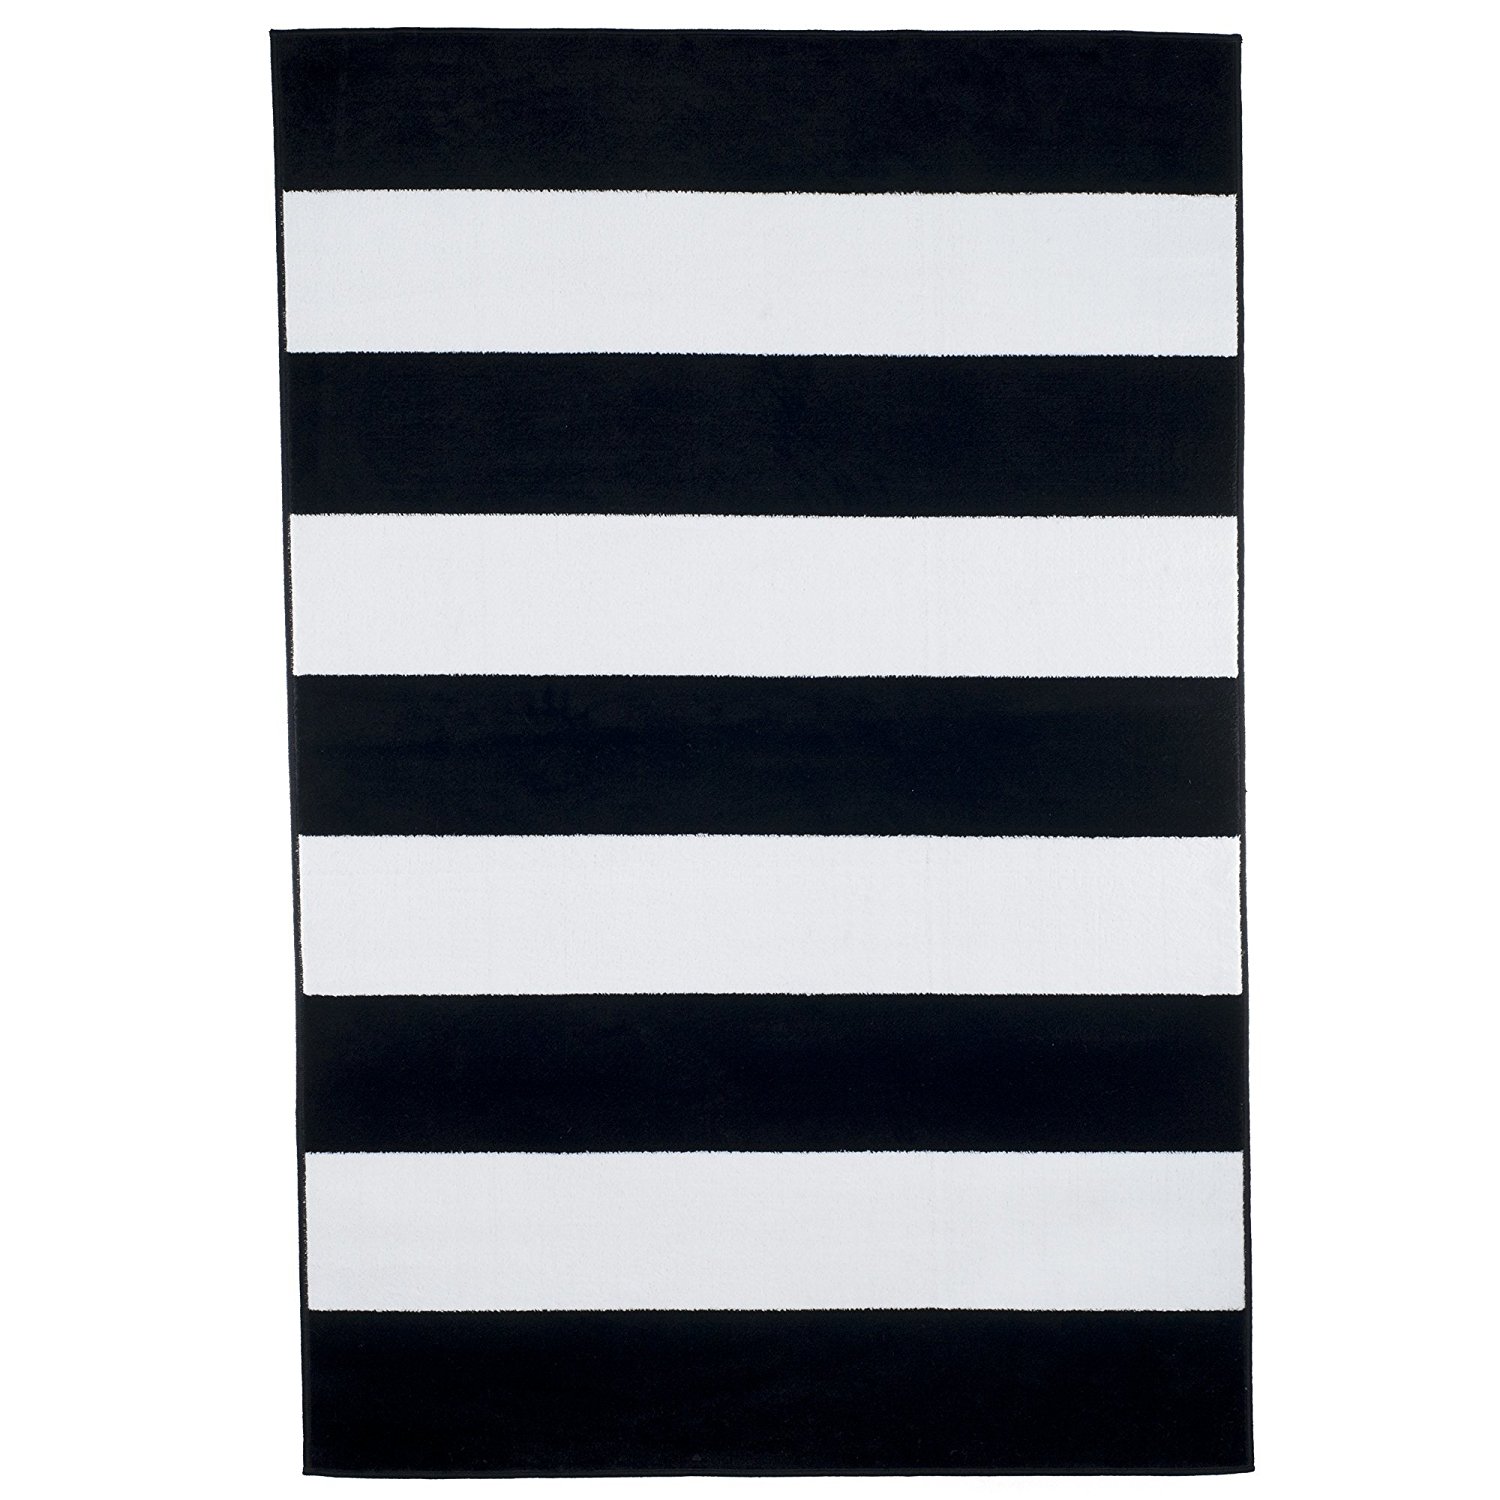 dorm rugs, black and white rugs, striped rugs